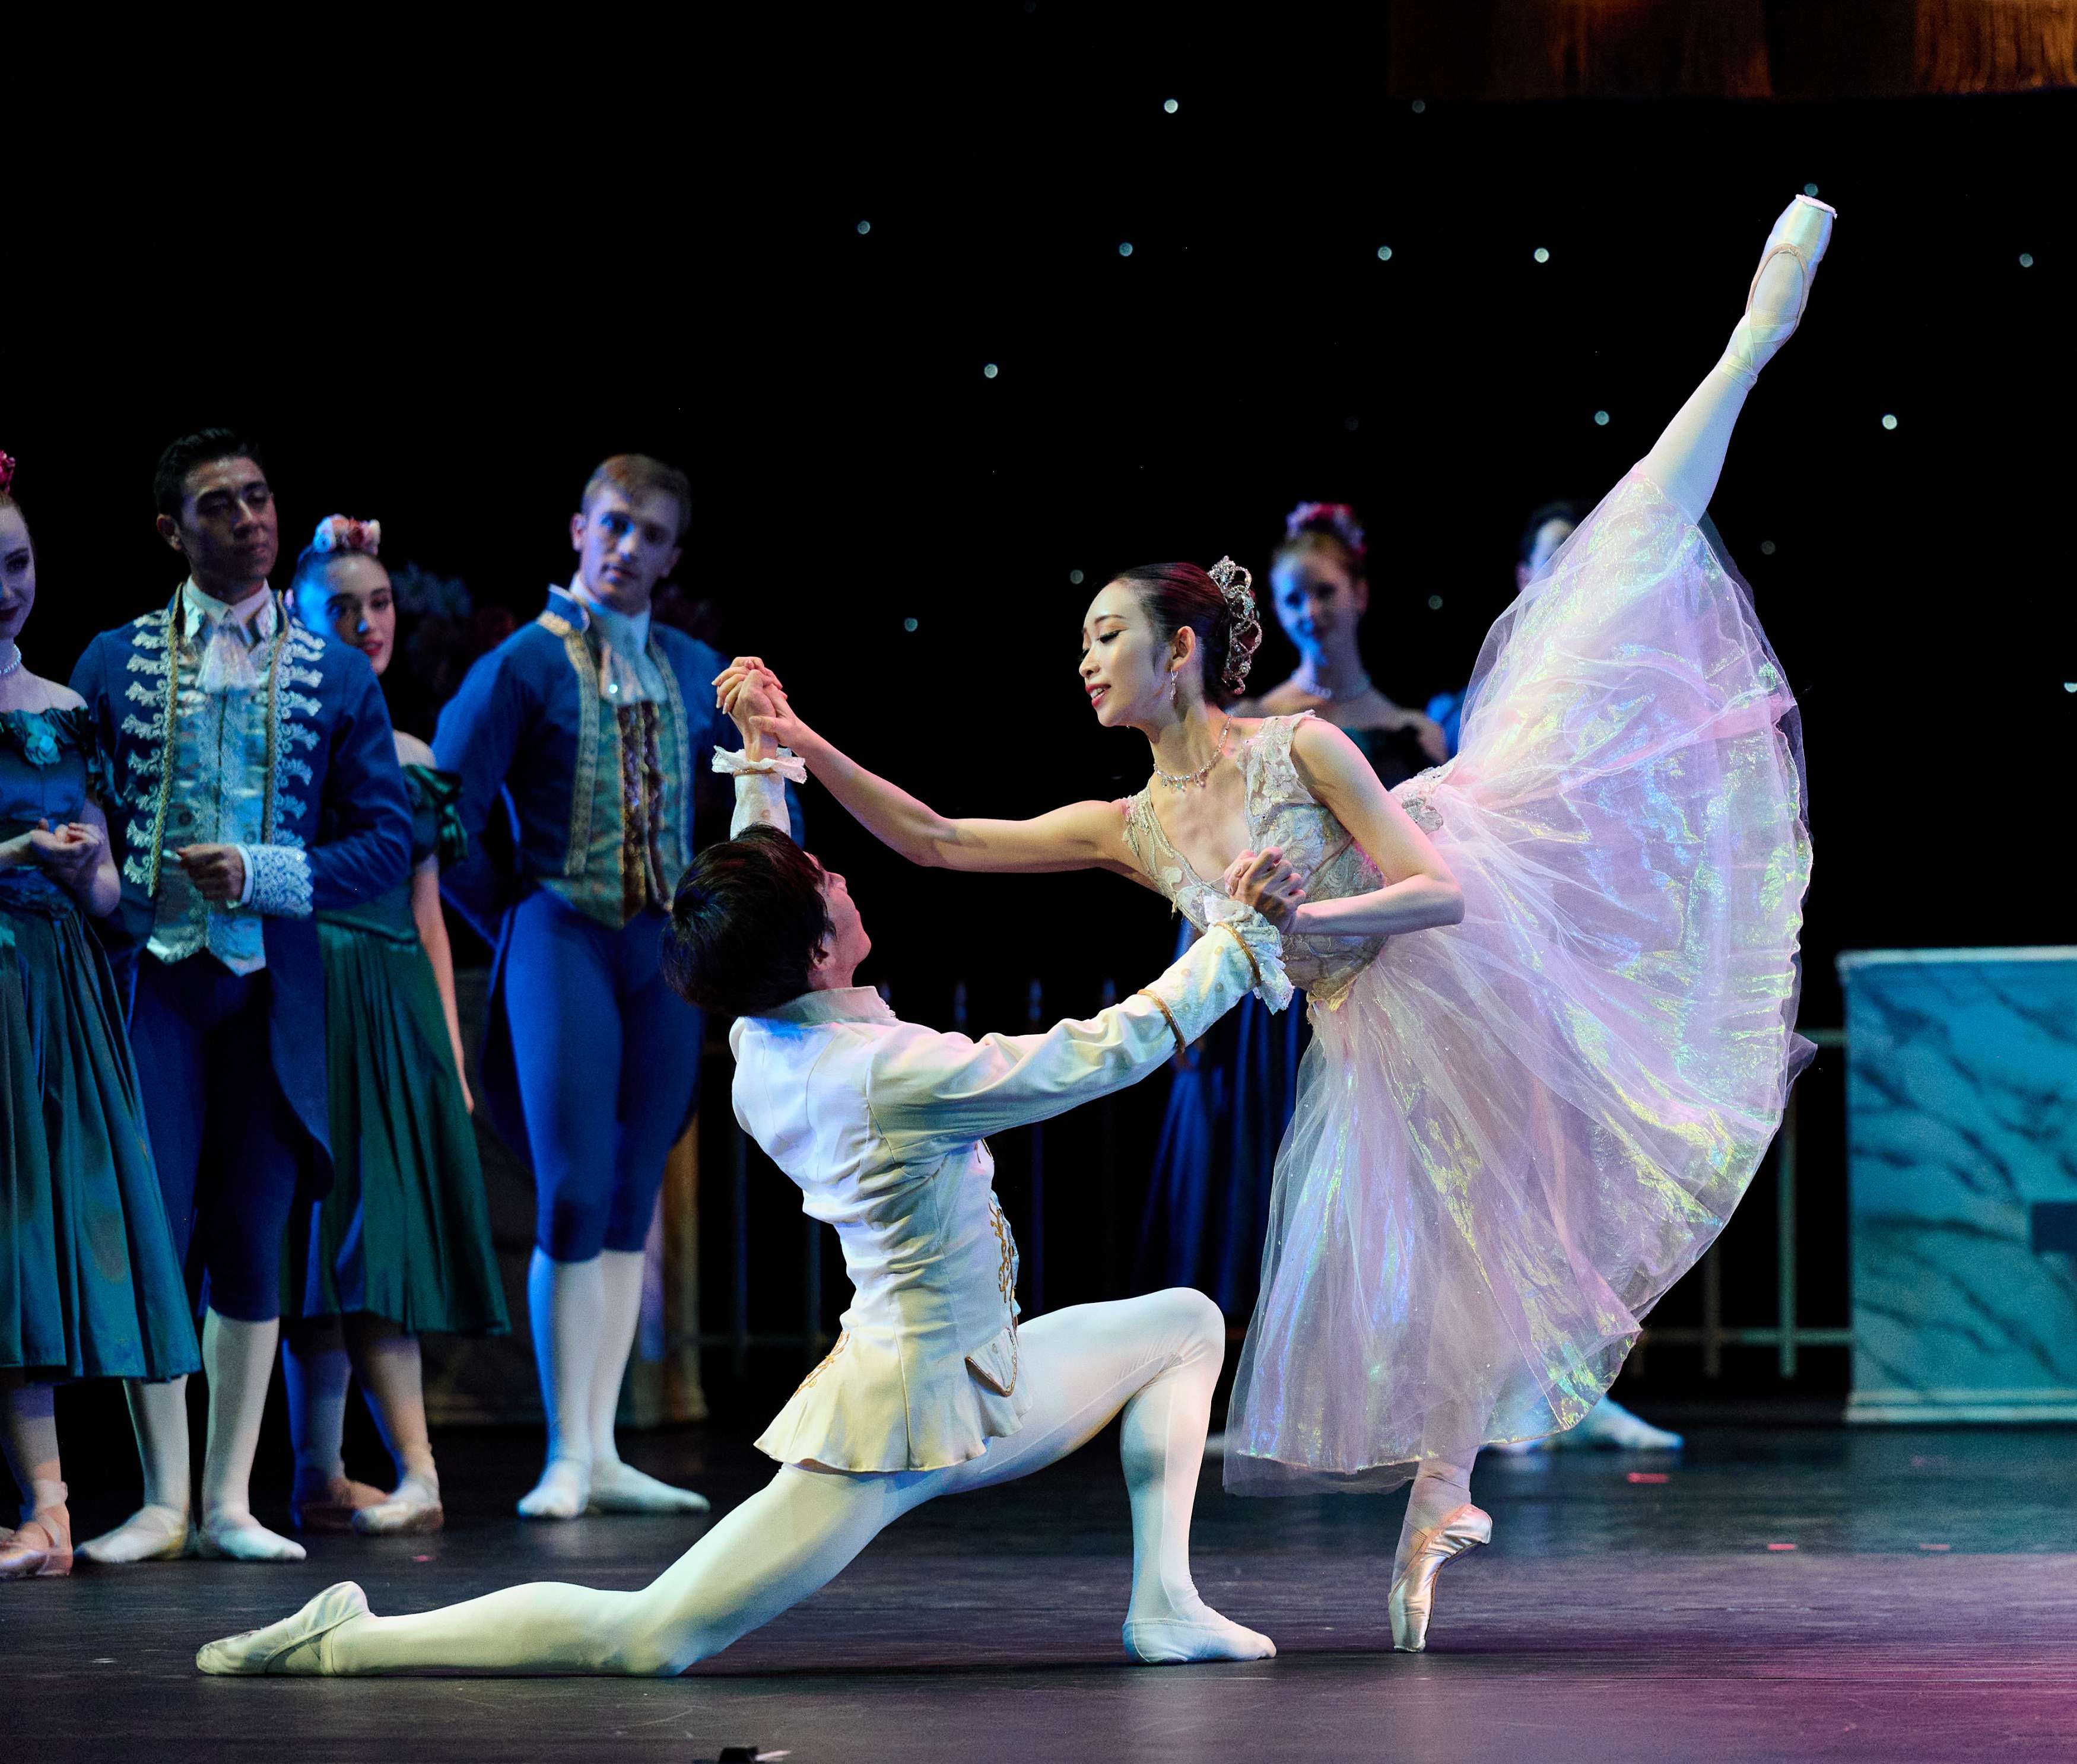 Ballet performance of Cinderella, with the male performer in white on the ground and the female performer holding his hands with one foot in the air